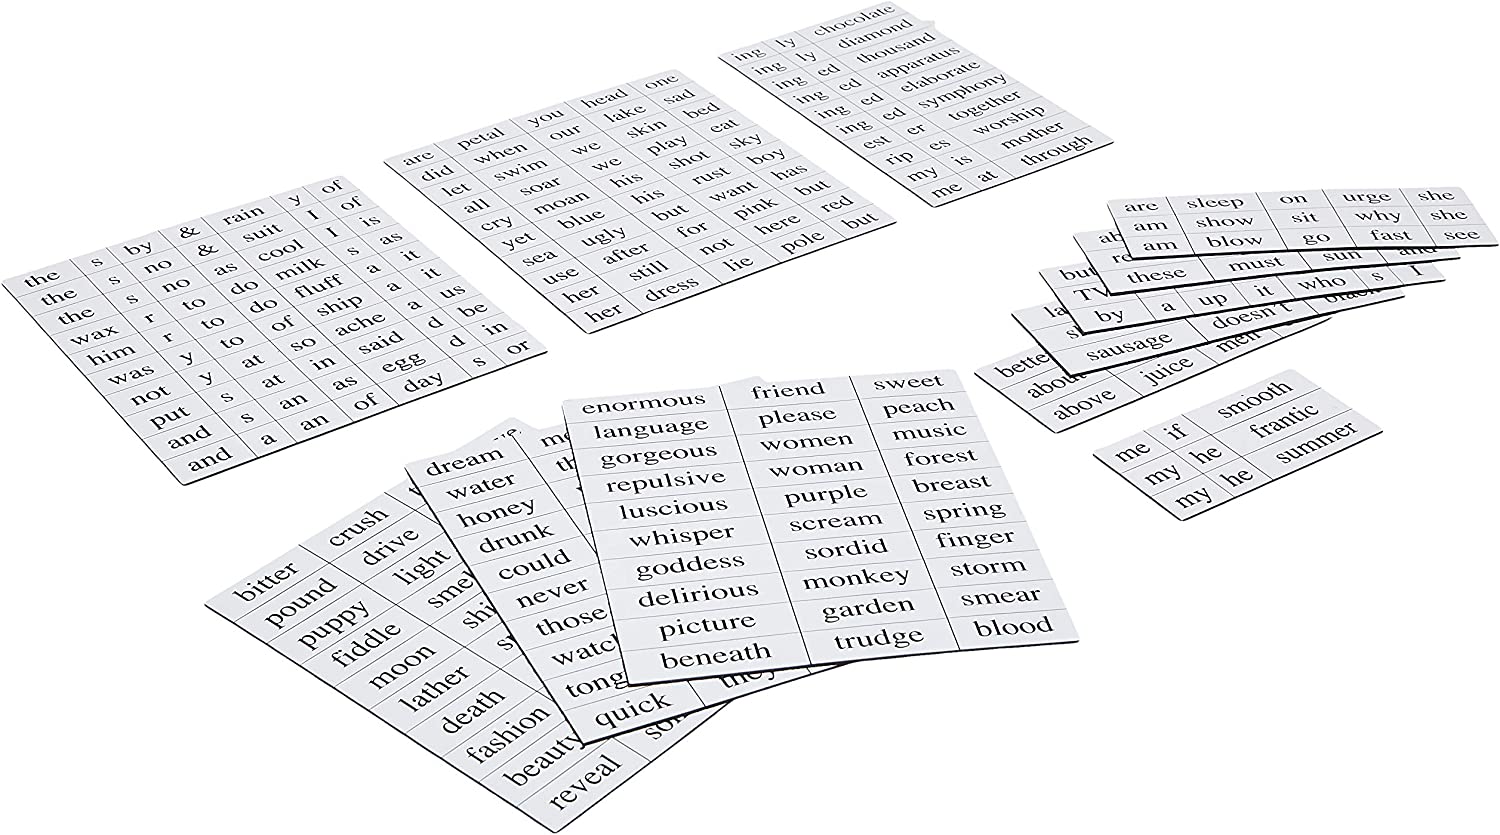 300 magnetic words that are included with the magnetic poetry kit.